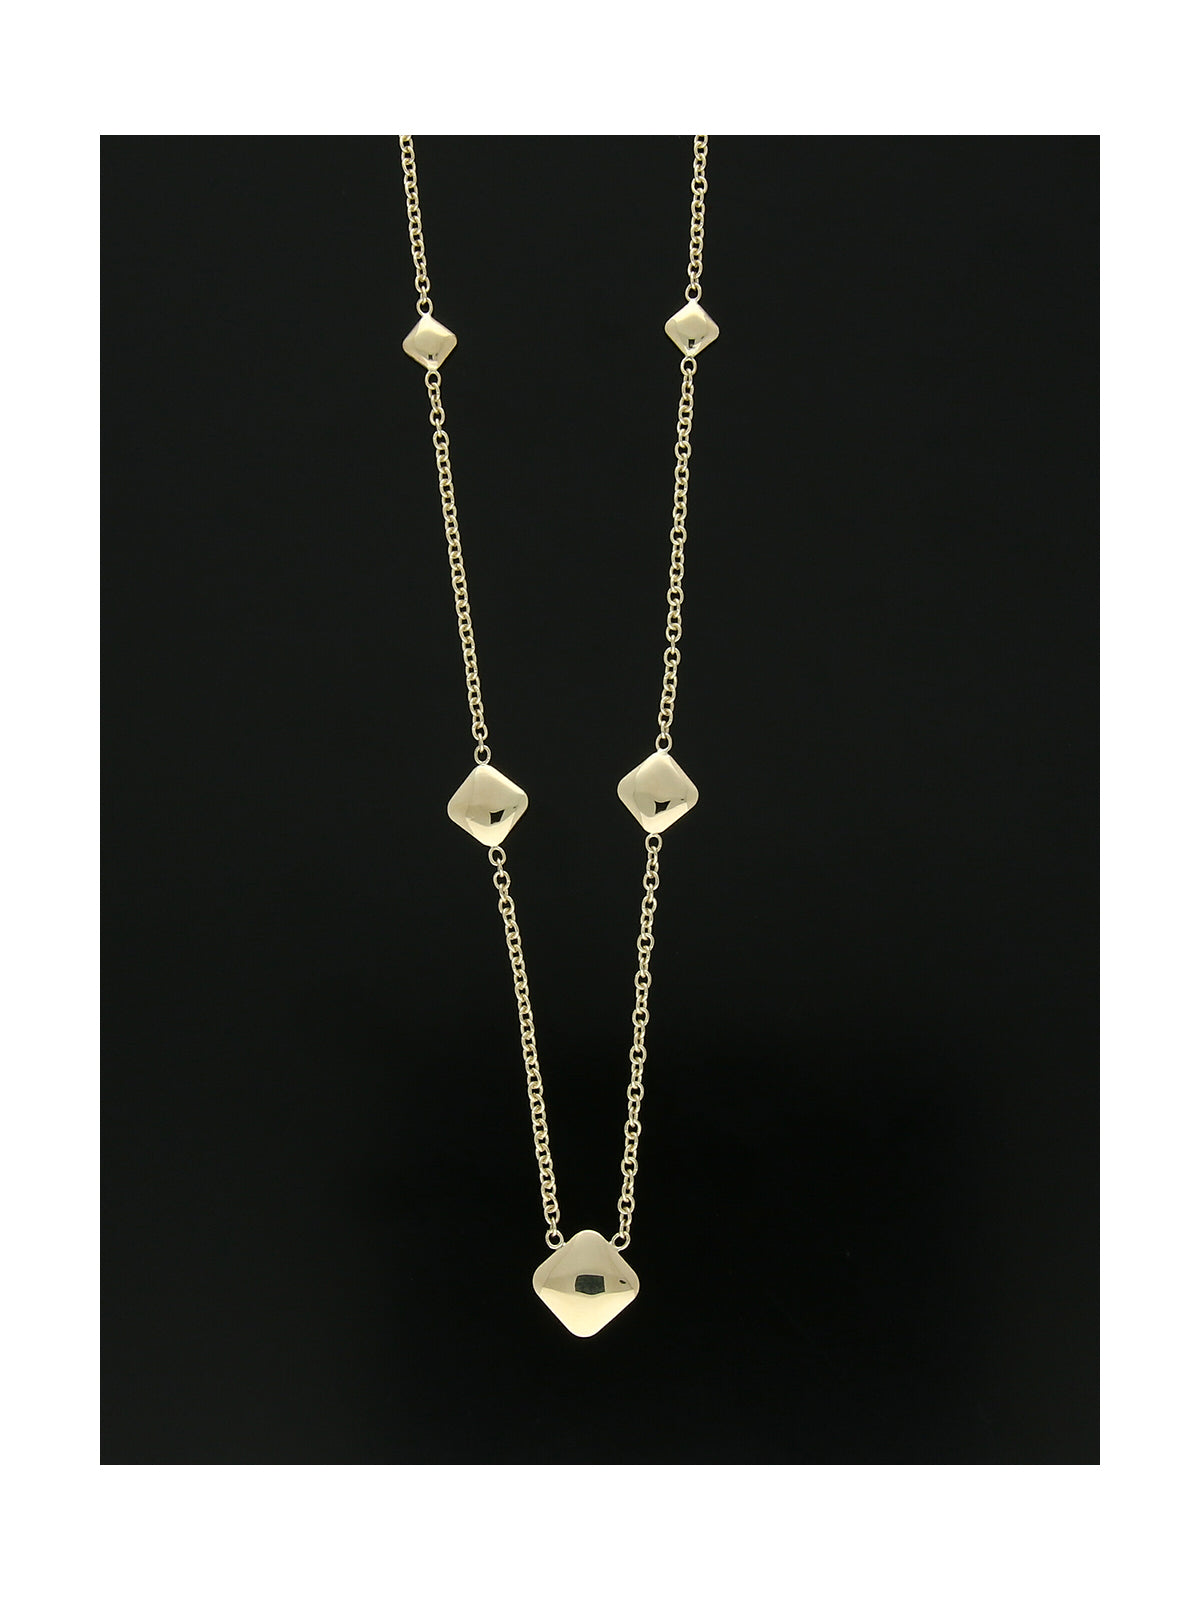 Polished Square Bead Necklace in 9ct Yellow Gold